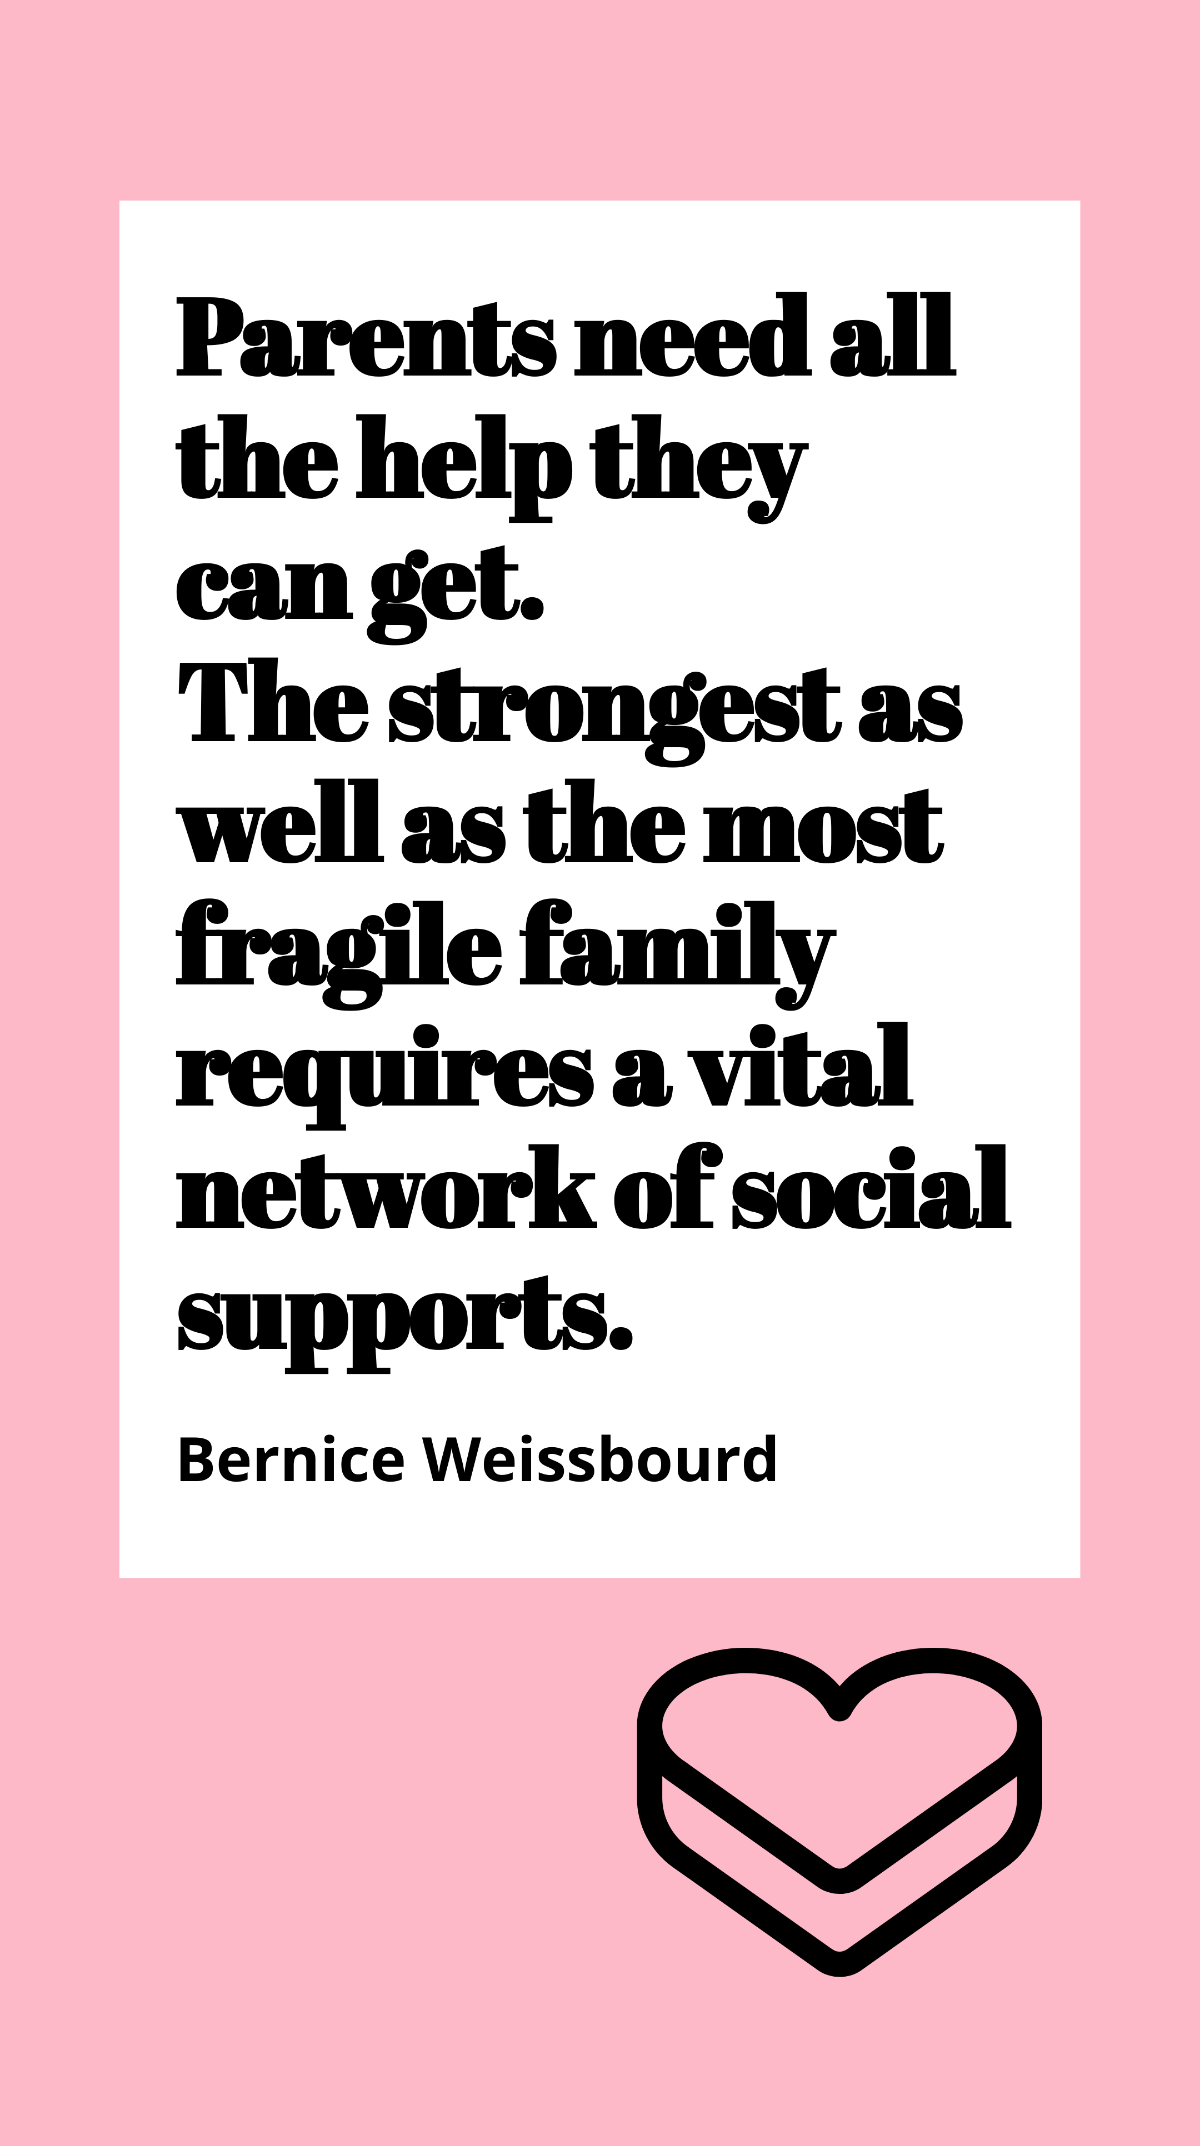 Bernice Weissbourd - Parents need all the help they can get. The strongest as well as the most fragile family requires a vital network of social supports. Template